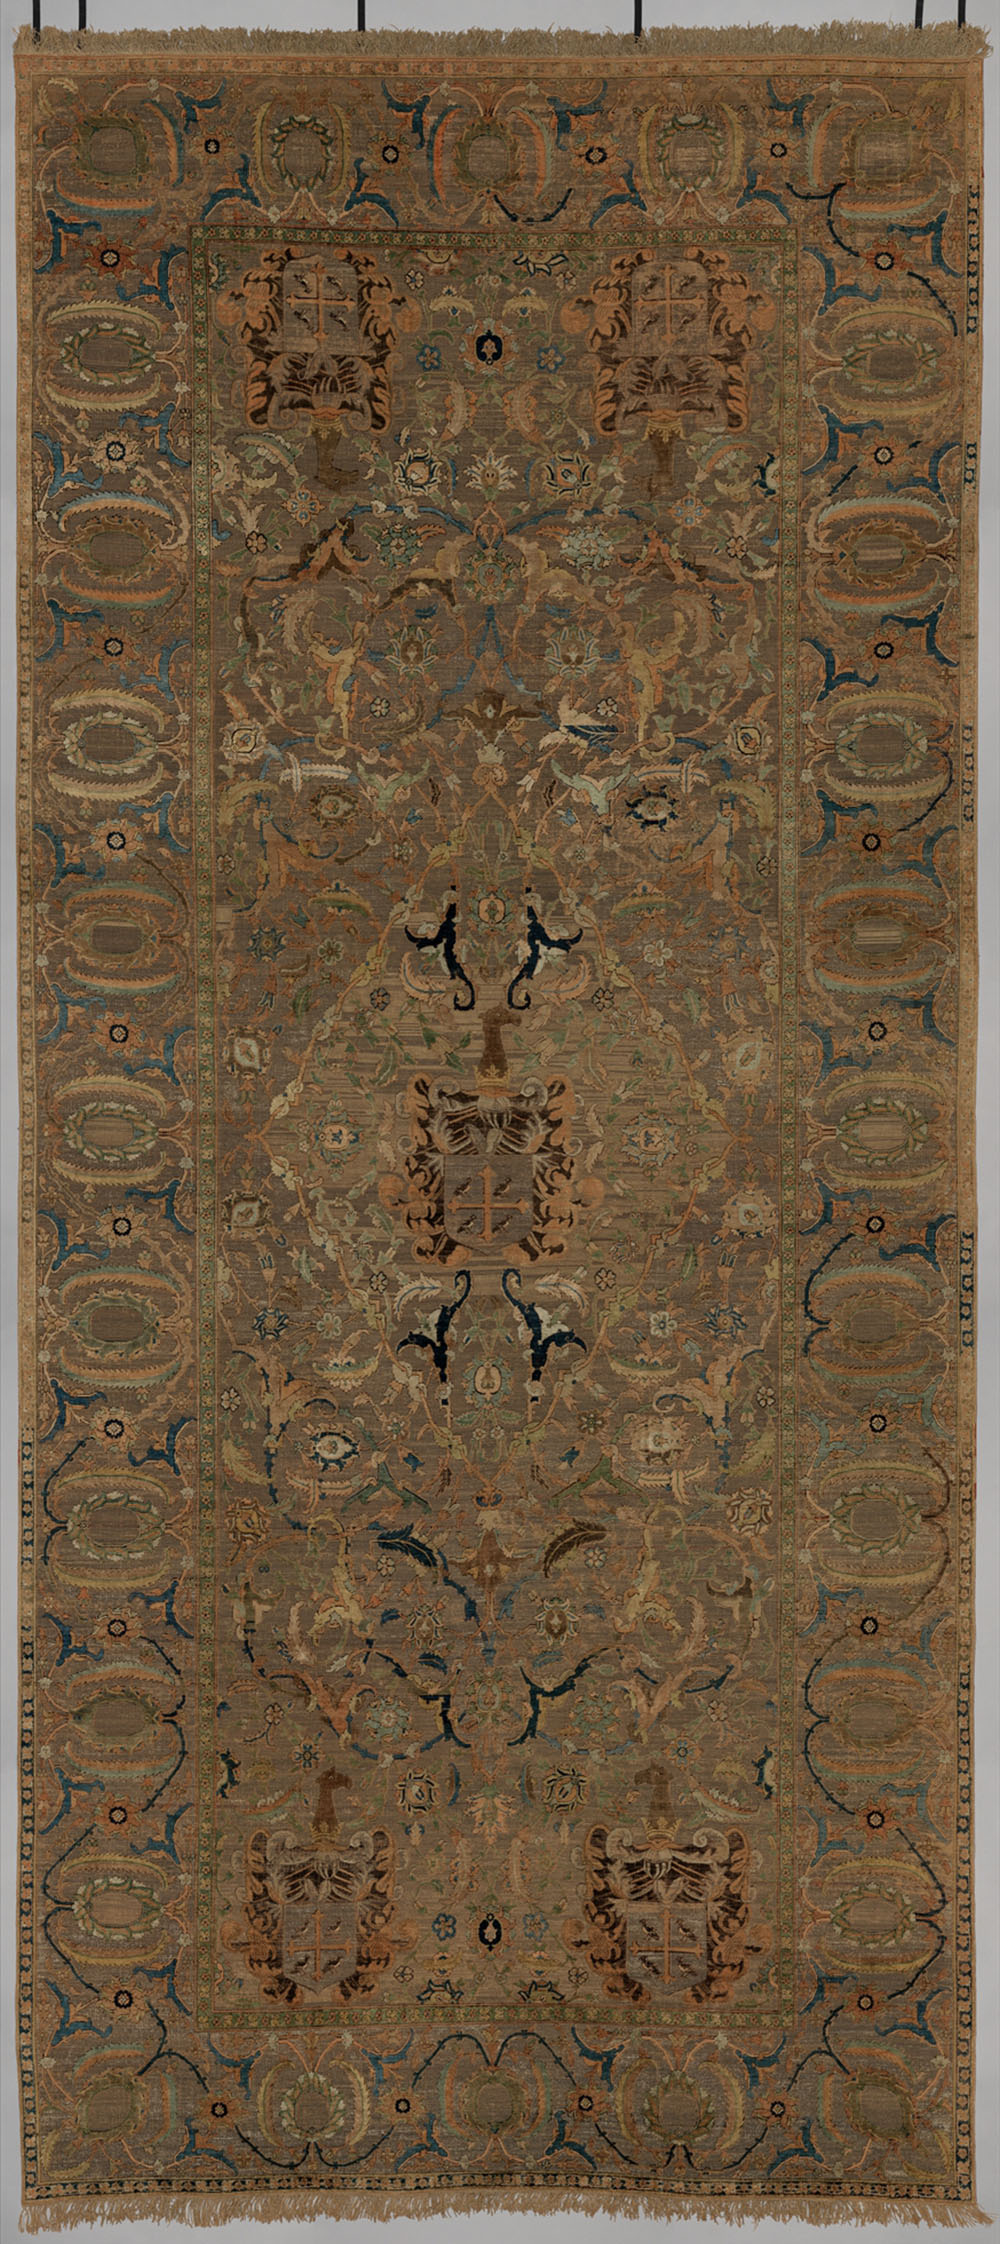 The Czartoryski Polonaise Carpet, central Persia, 17th century. Silk pile brocaded with metal-wrapped thread; 2.17 x 4.86 m (7’ 2” x 15’ 2”). Metropolitan Museum of Art, Gift of John D. Rockefeller Jr., and Harris Brisbane Dick Fund, by exchange, 1945, 45.106